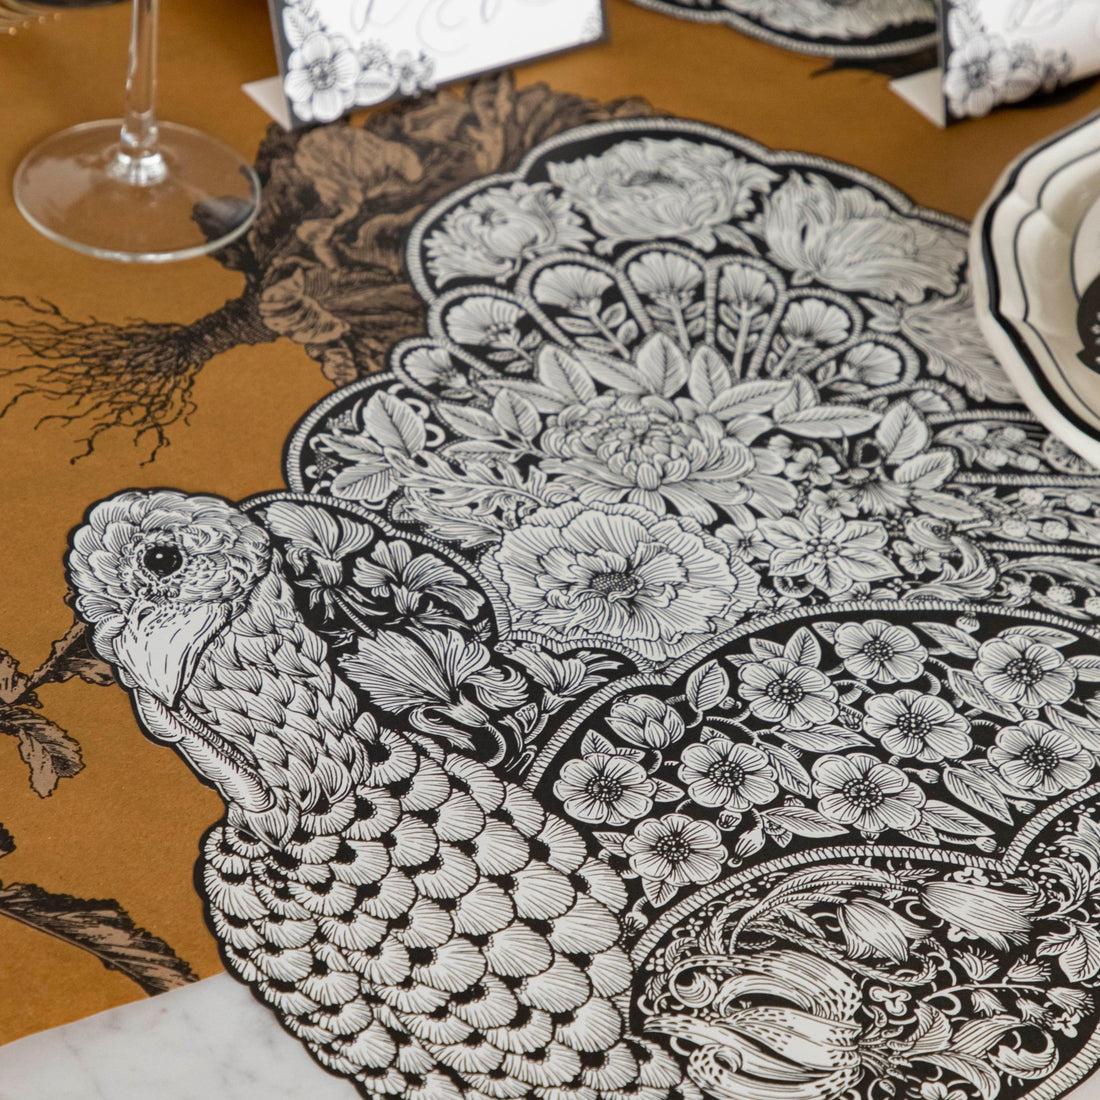 Close-up of the Die-cut Ebony Harvest Turkey Placemat under an elegant place setting, showing the intricate artwork.